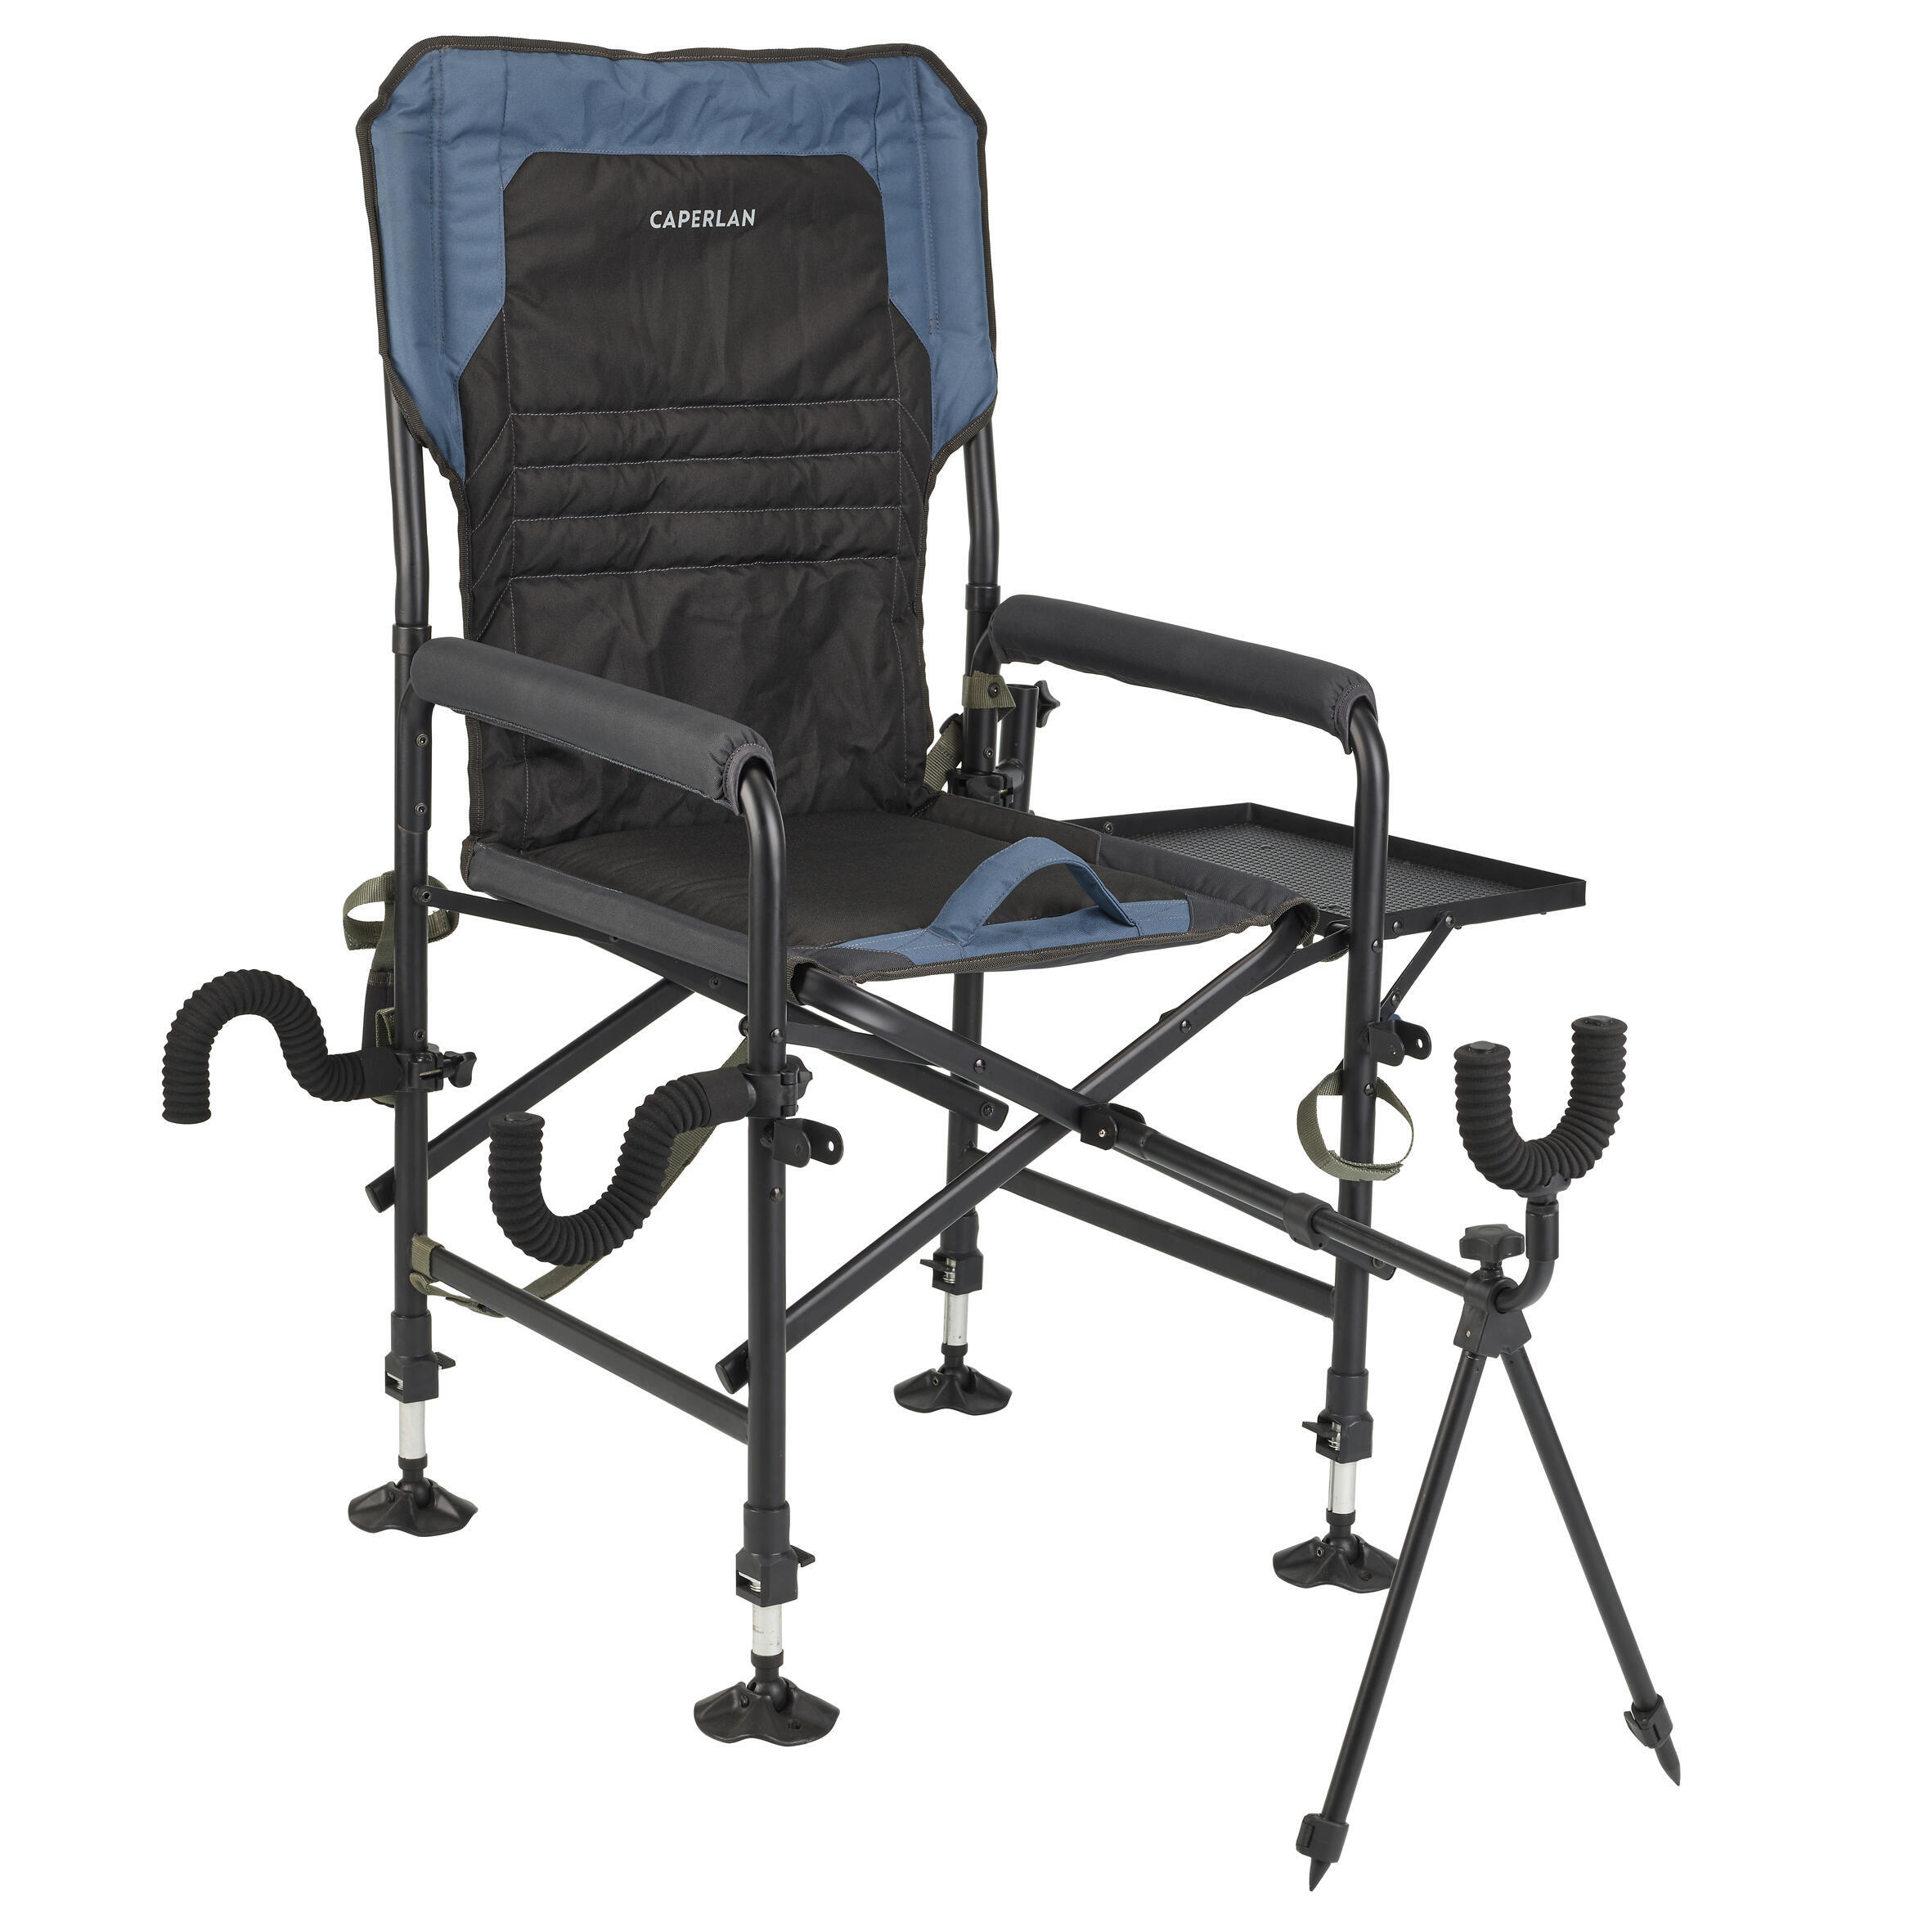 Fishing chairs and seat boxes